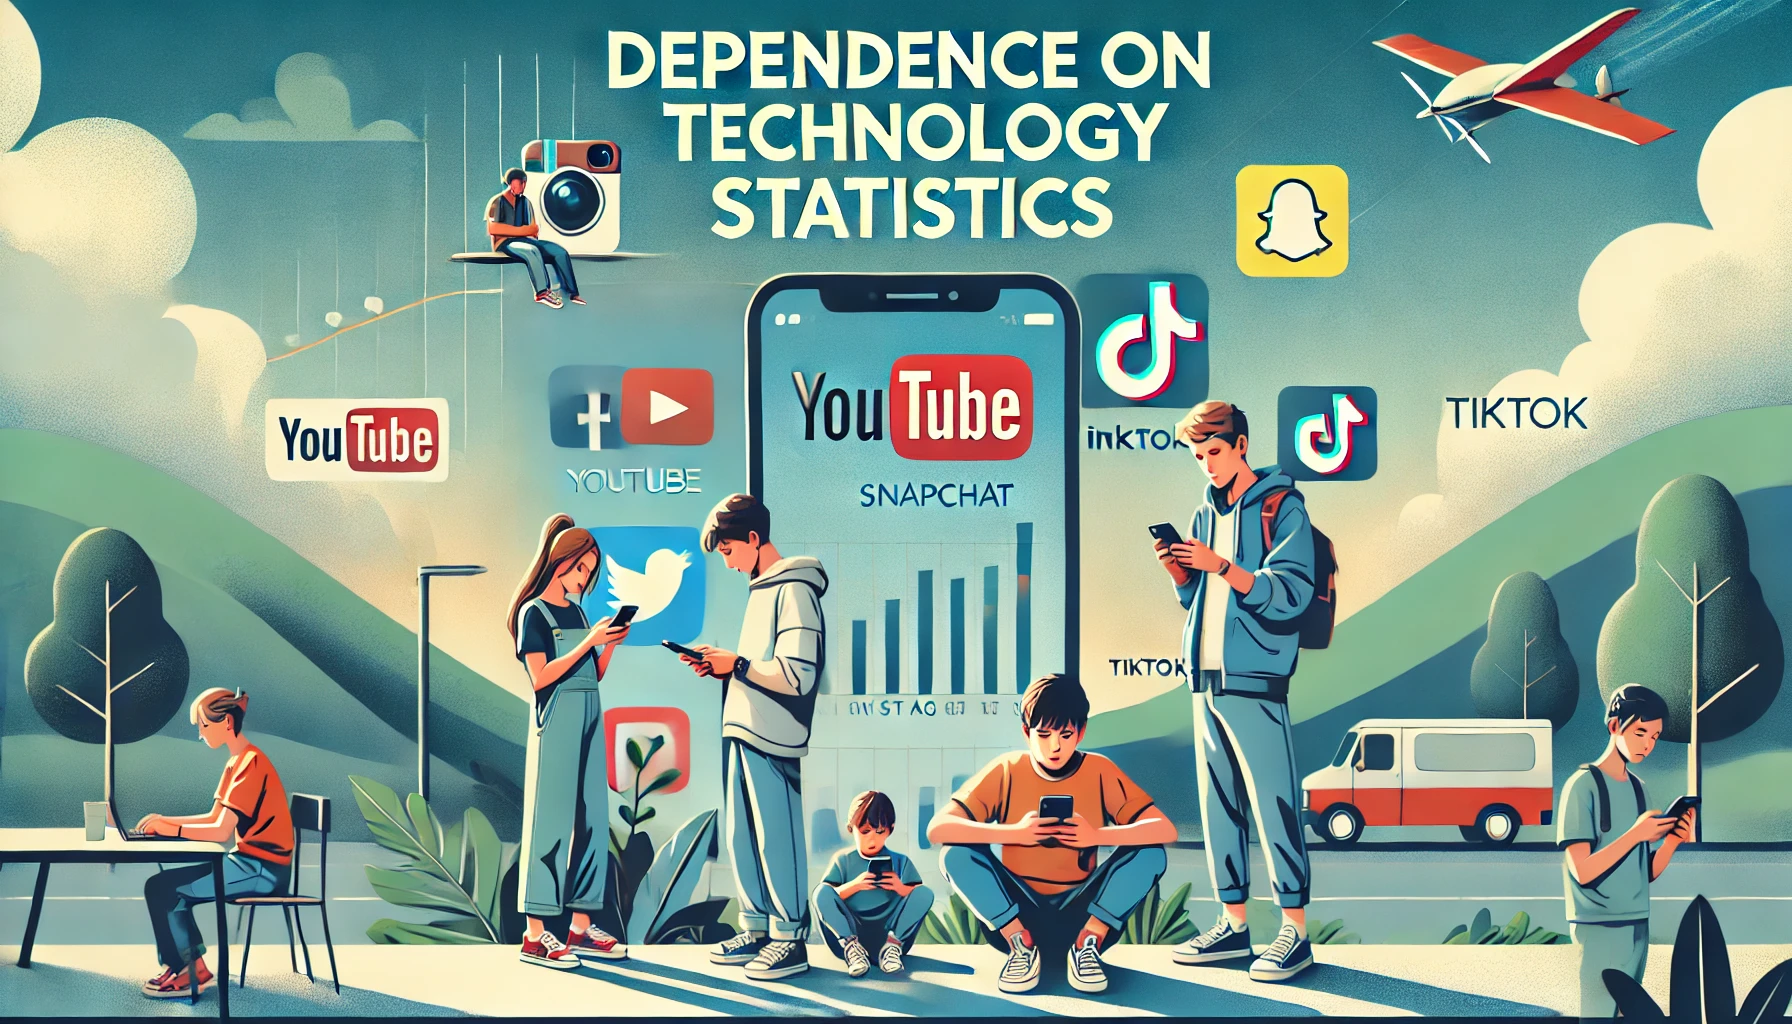 Dependence on Technology Statistics By Demographics and Share of Going Online